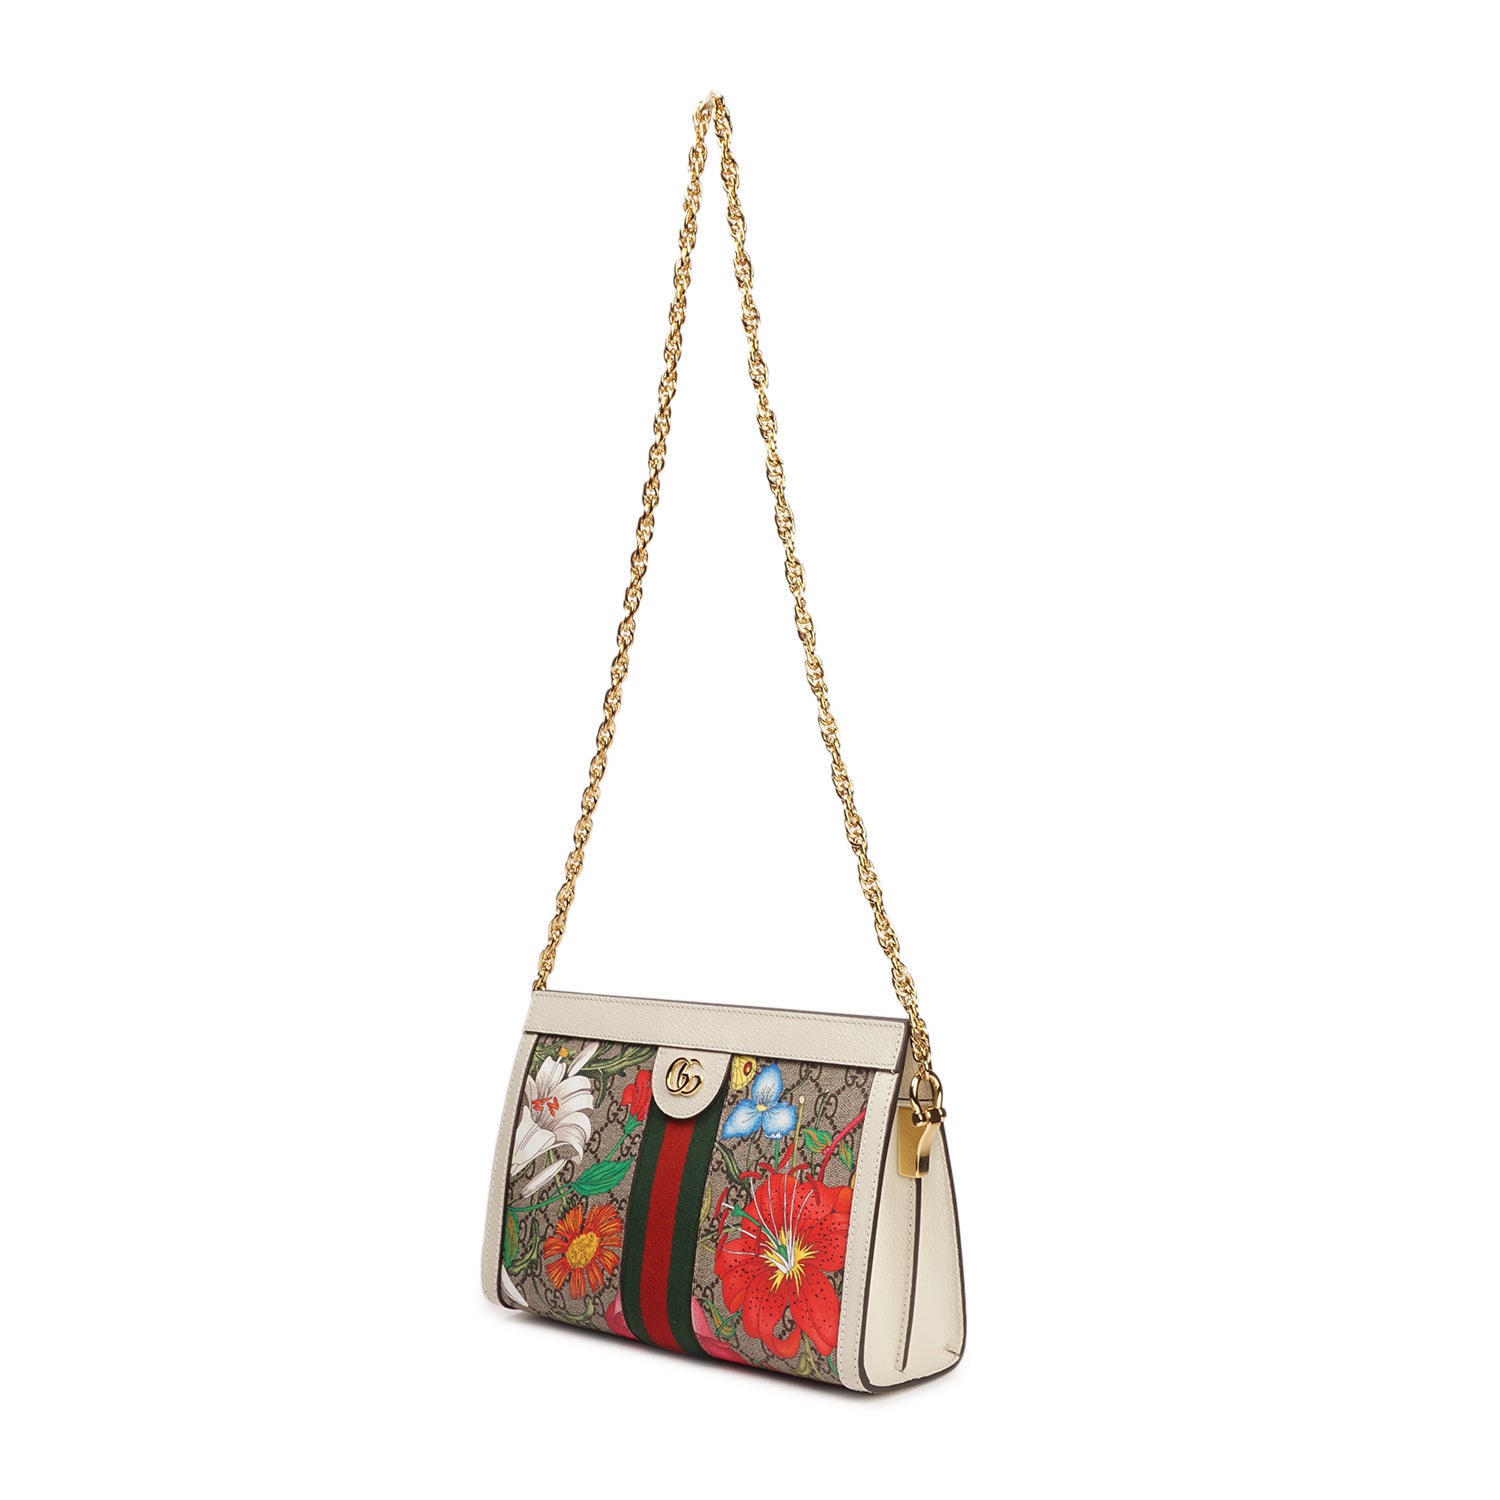 GUCCI OPHIDIA GG FLORA SMALL SHOULDER BAG IN RED